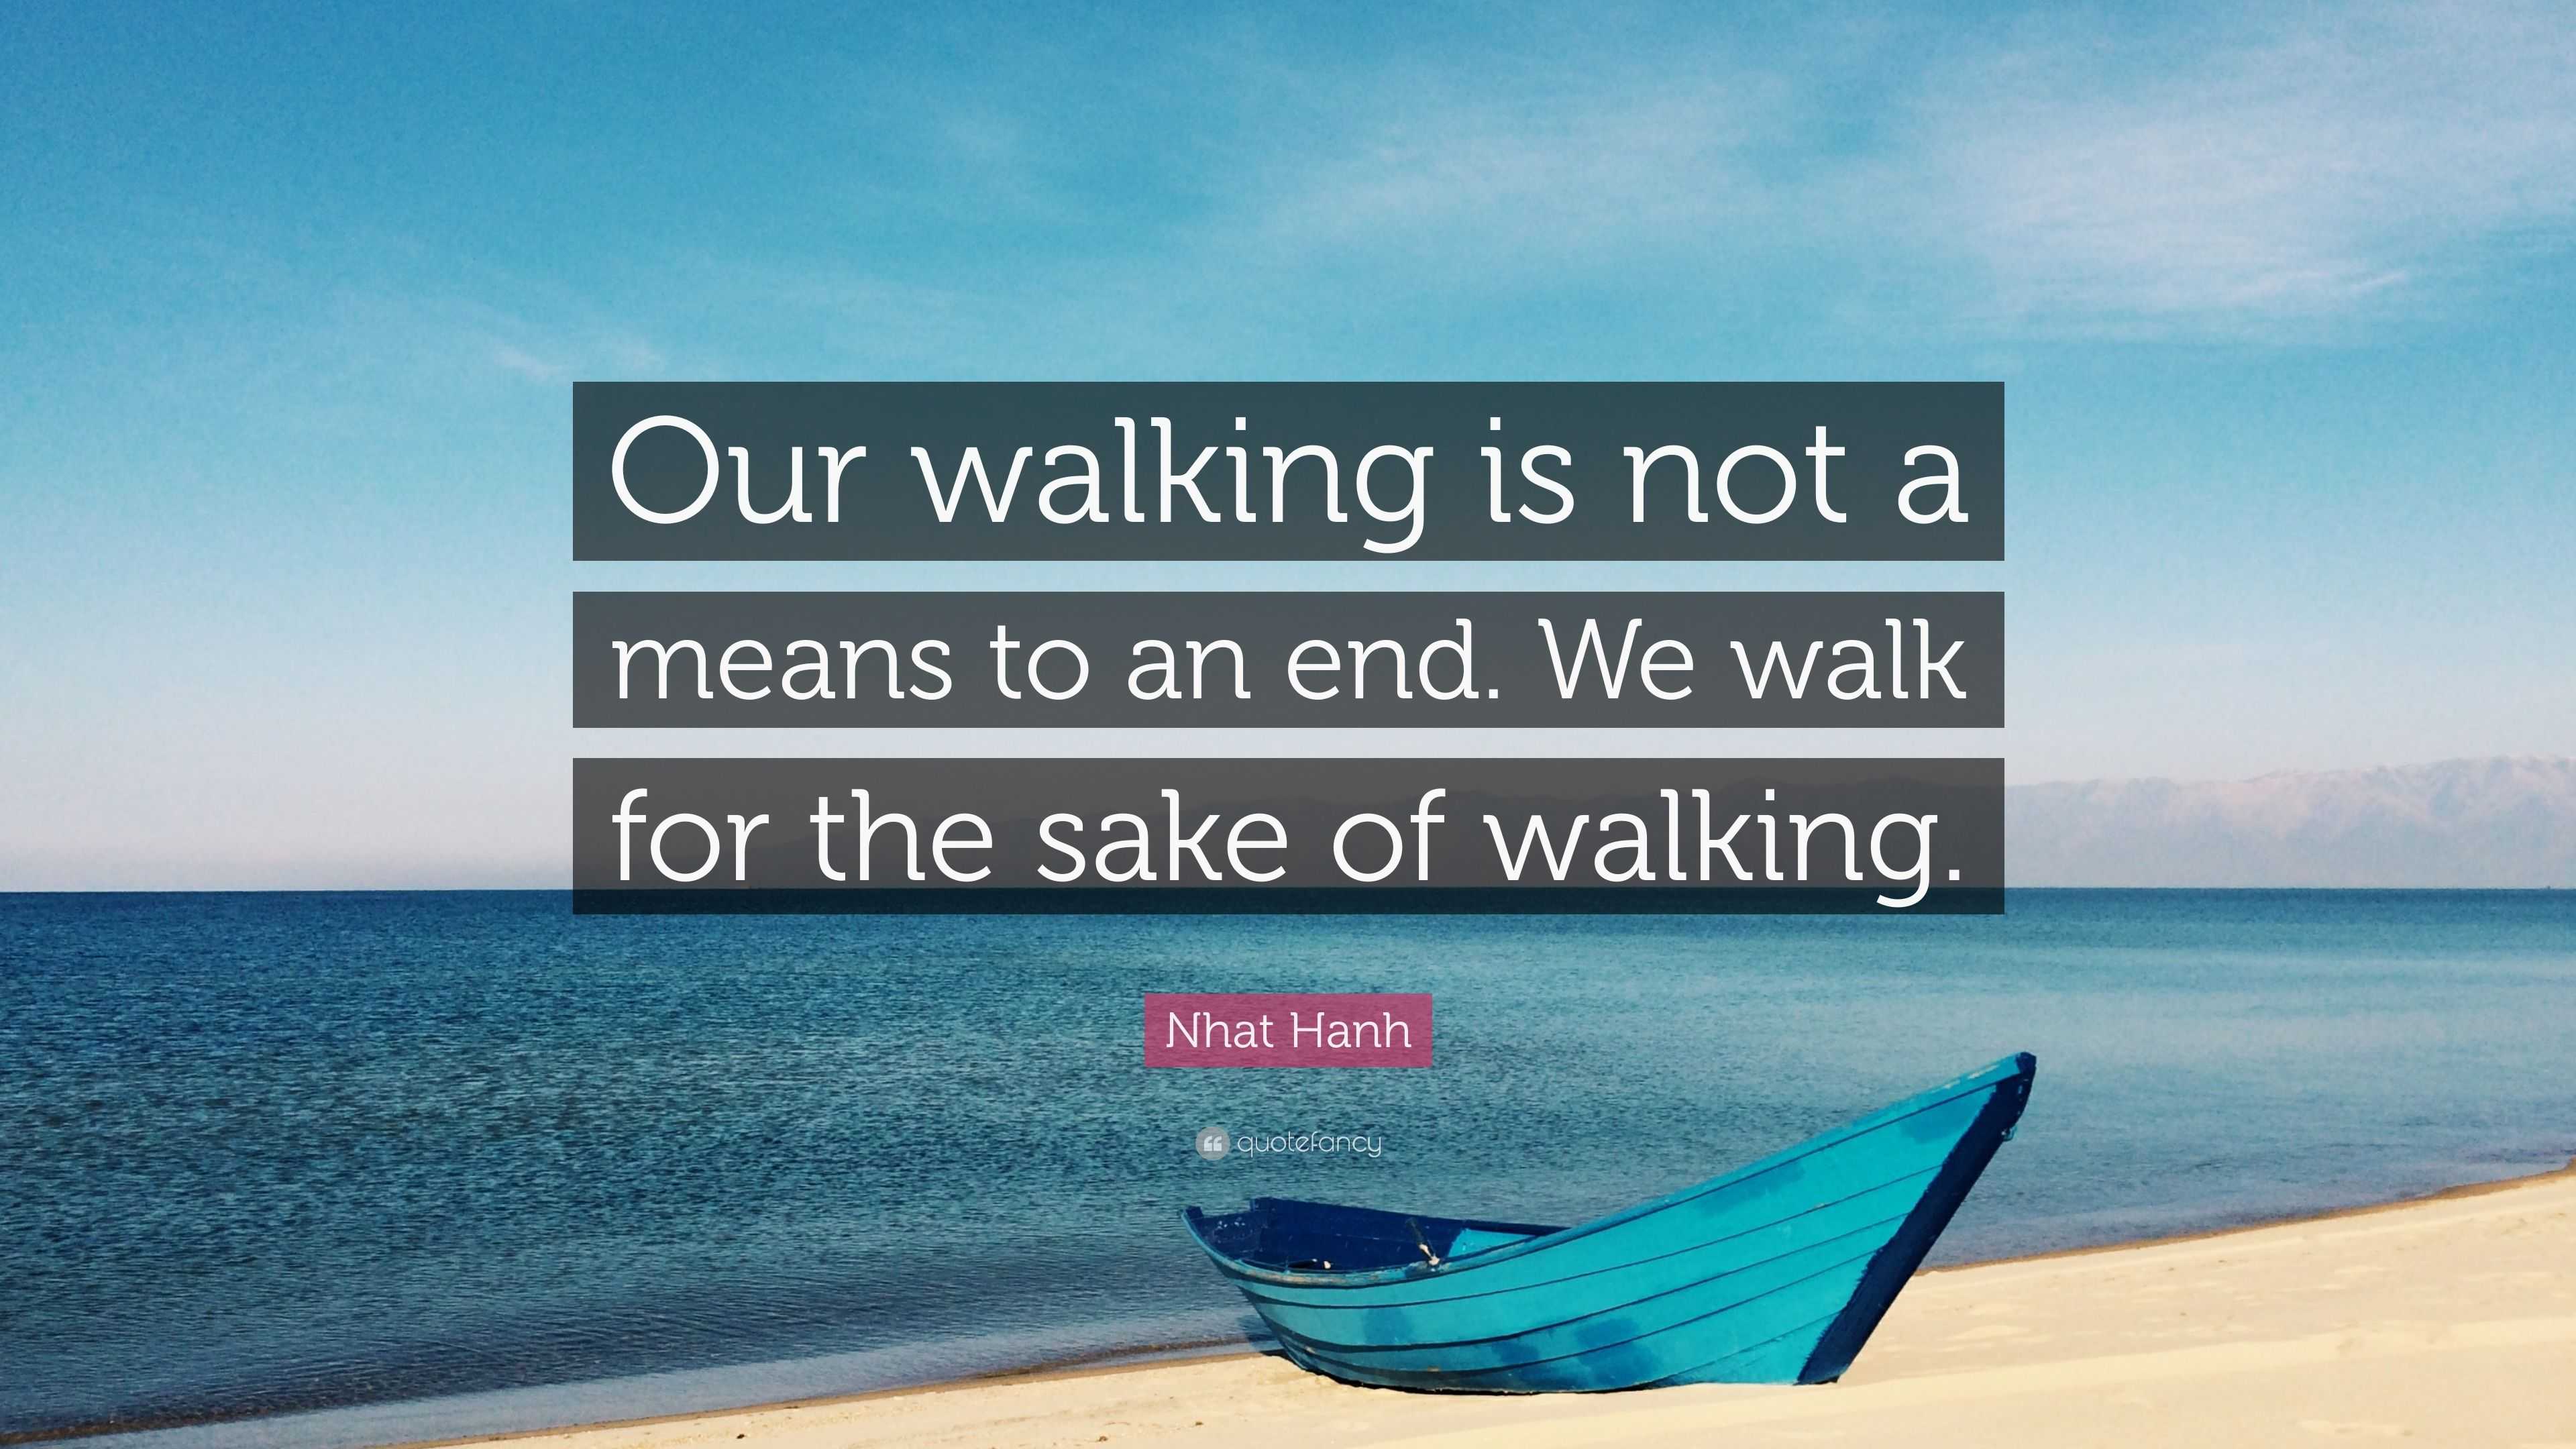 Nhat Hanh Quote: “Our walking is not a means to an end. We walk for the ...